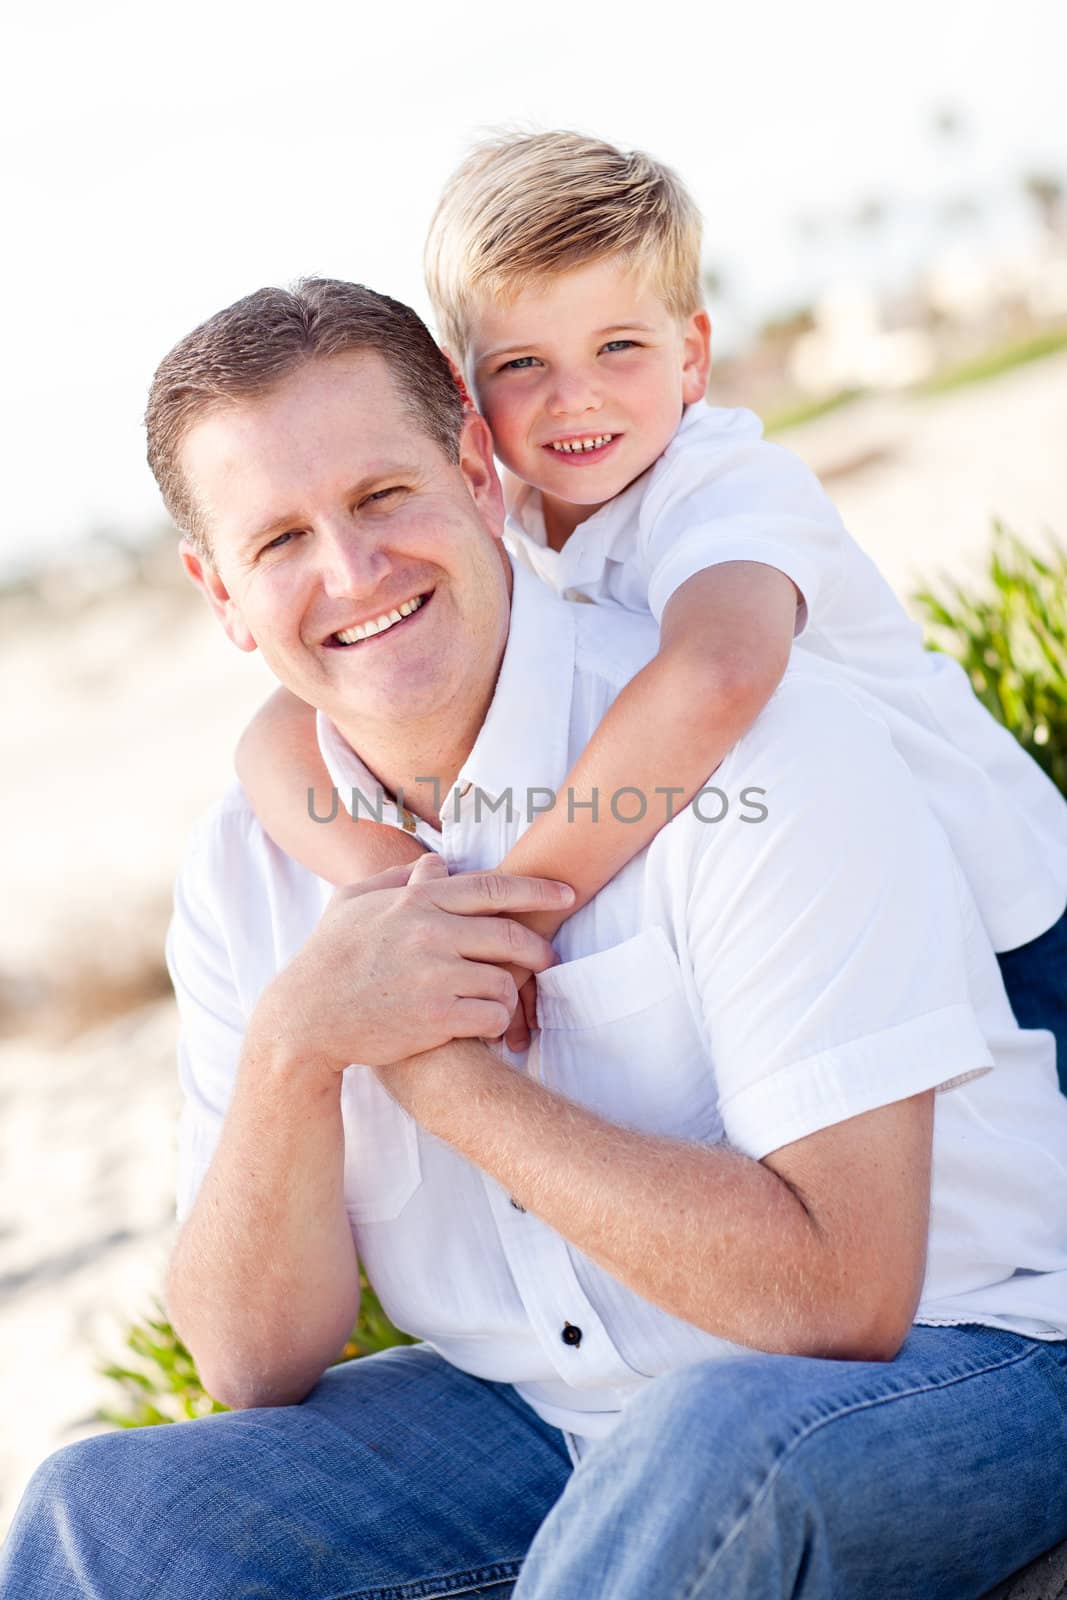 Cute Son with His Handsome Dad Portrait by Feverpitched